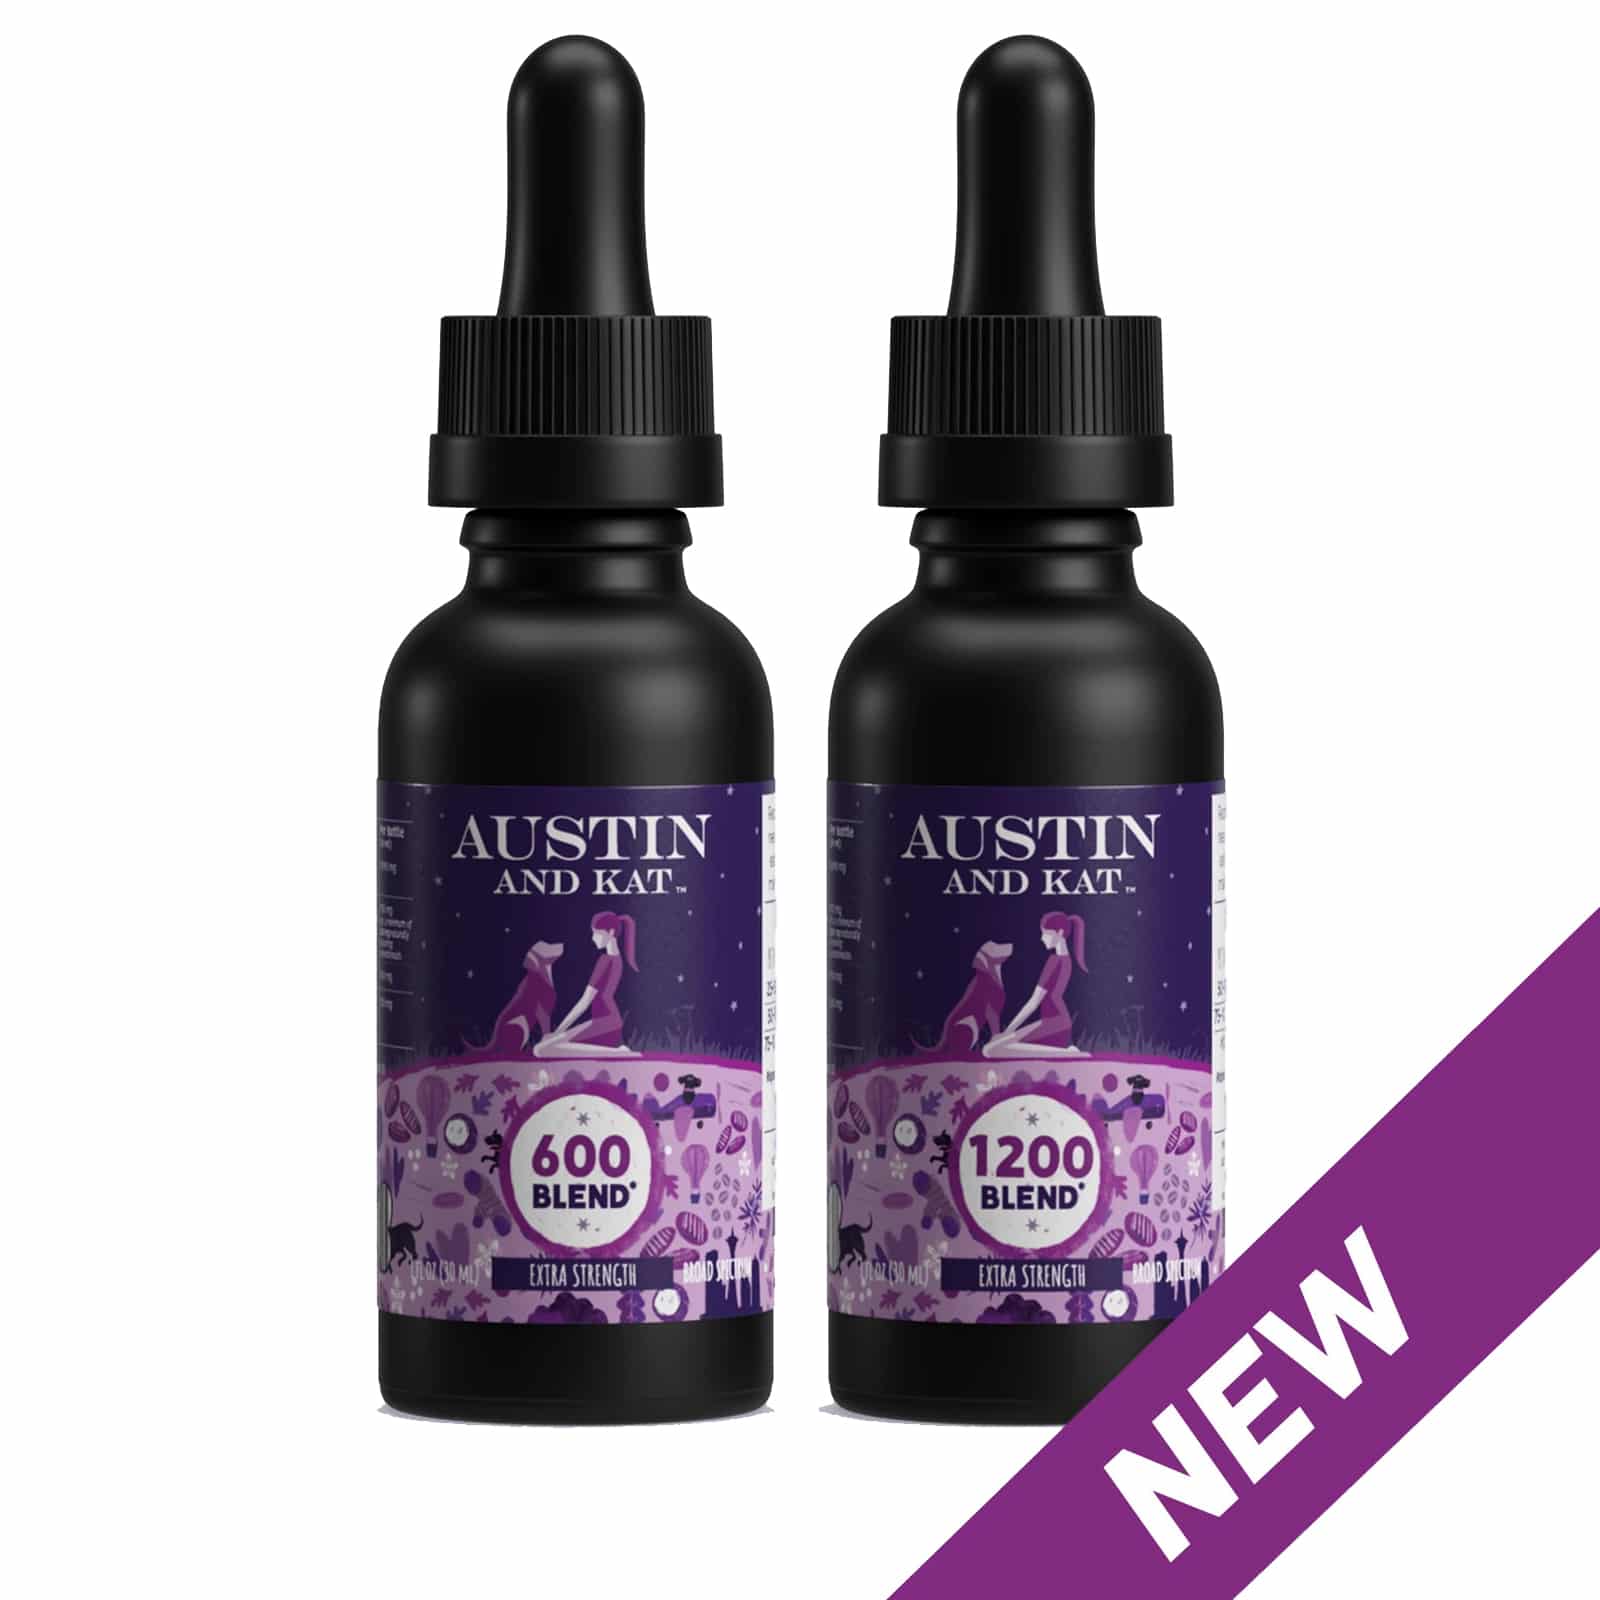 Austin and Kat High Potency Hemp Extracts - Review